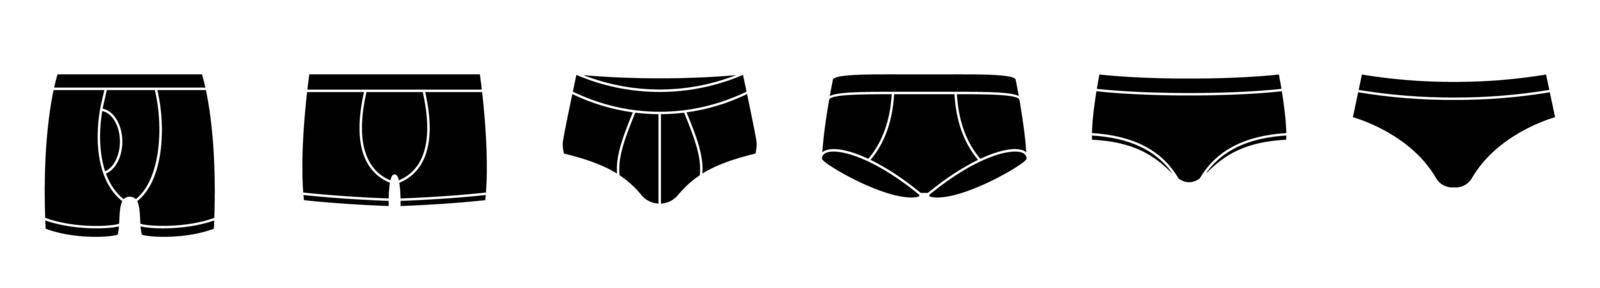 Underpants icon. Set of men's underwear icons. Vector illustration. by Chekman